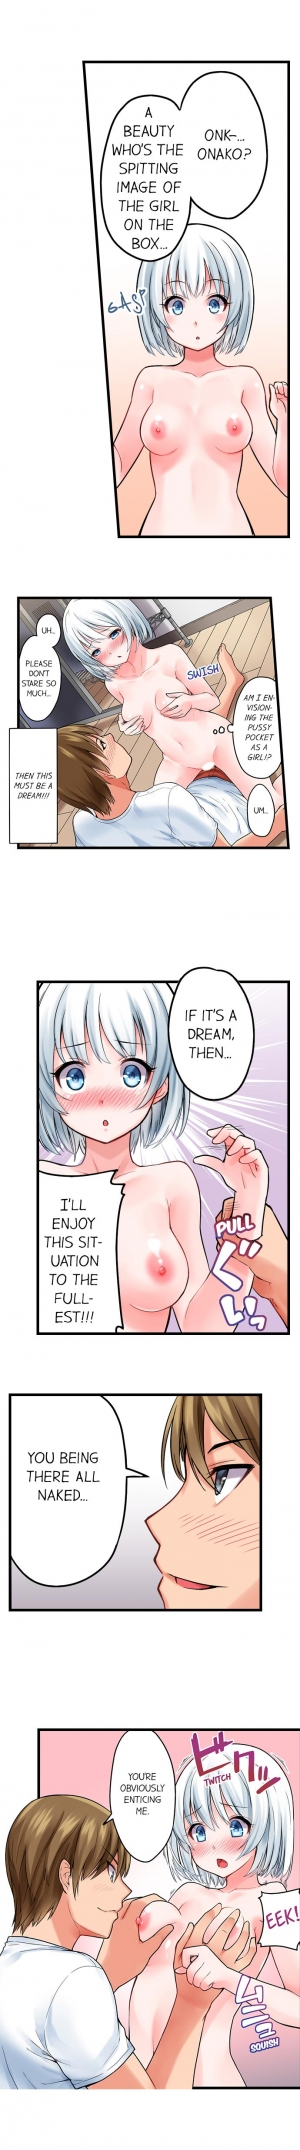 [Kintarou] The Descent to Earth of The Great Pussy Virgin Ch. 1-9 (Ongoing) [English] - Page 9